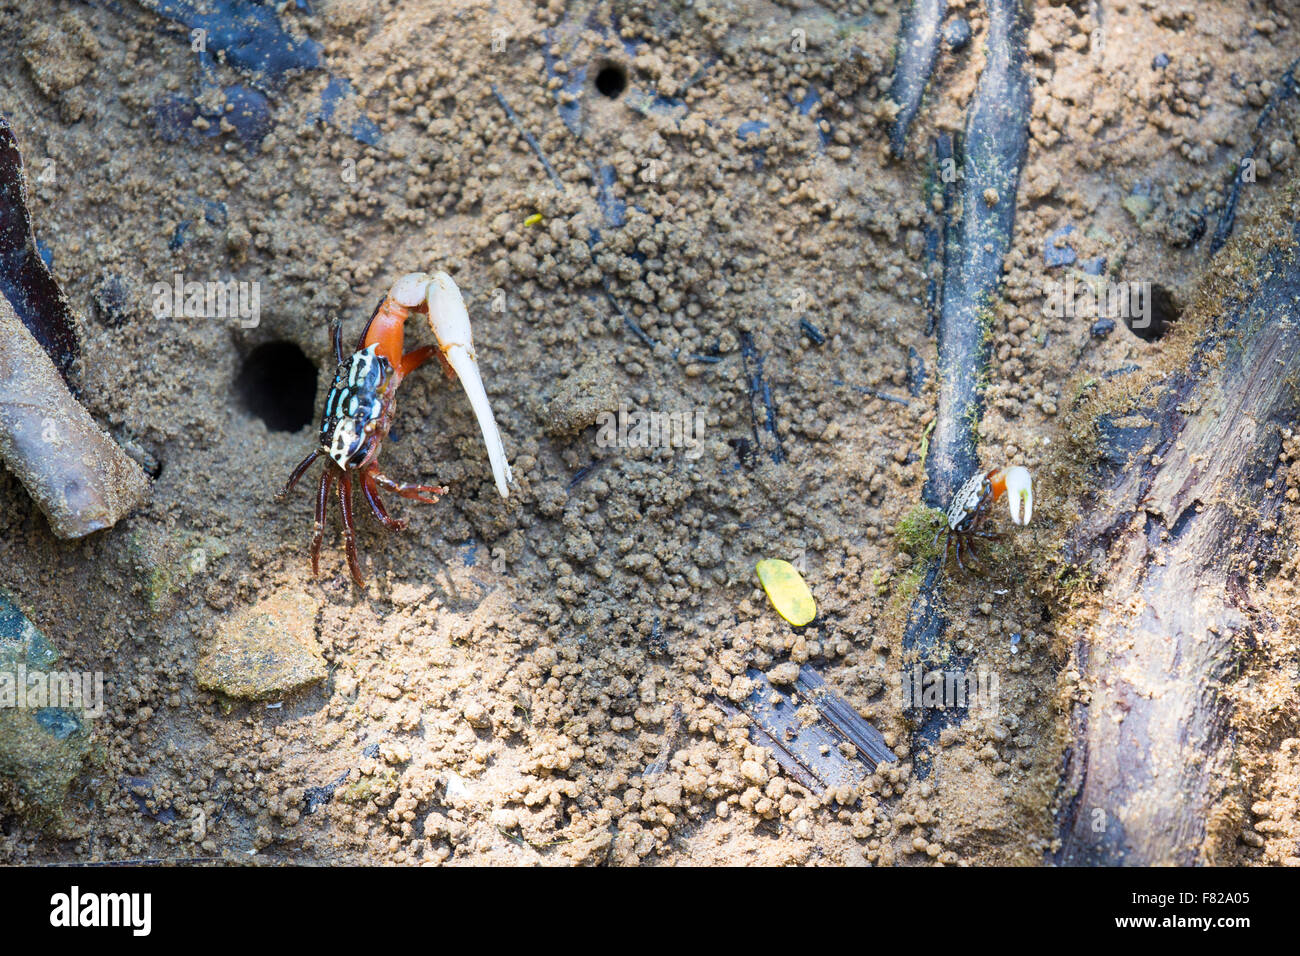 Unequal rivals, 2 ring-legged fiddler crabs (Uca annulipes) display Stock Photo